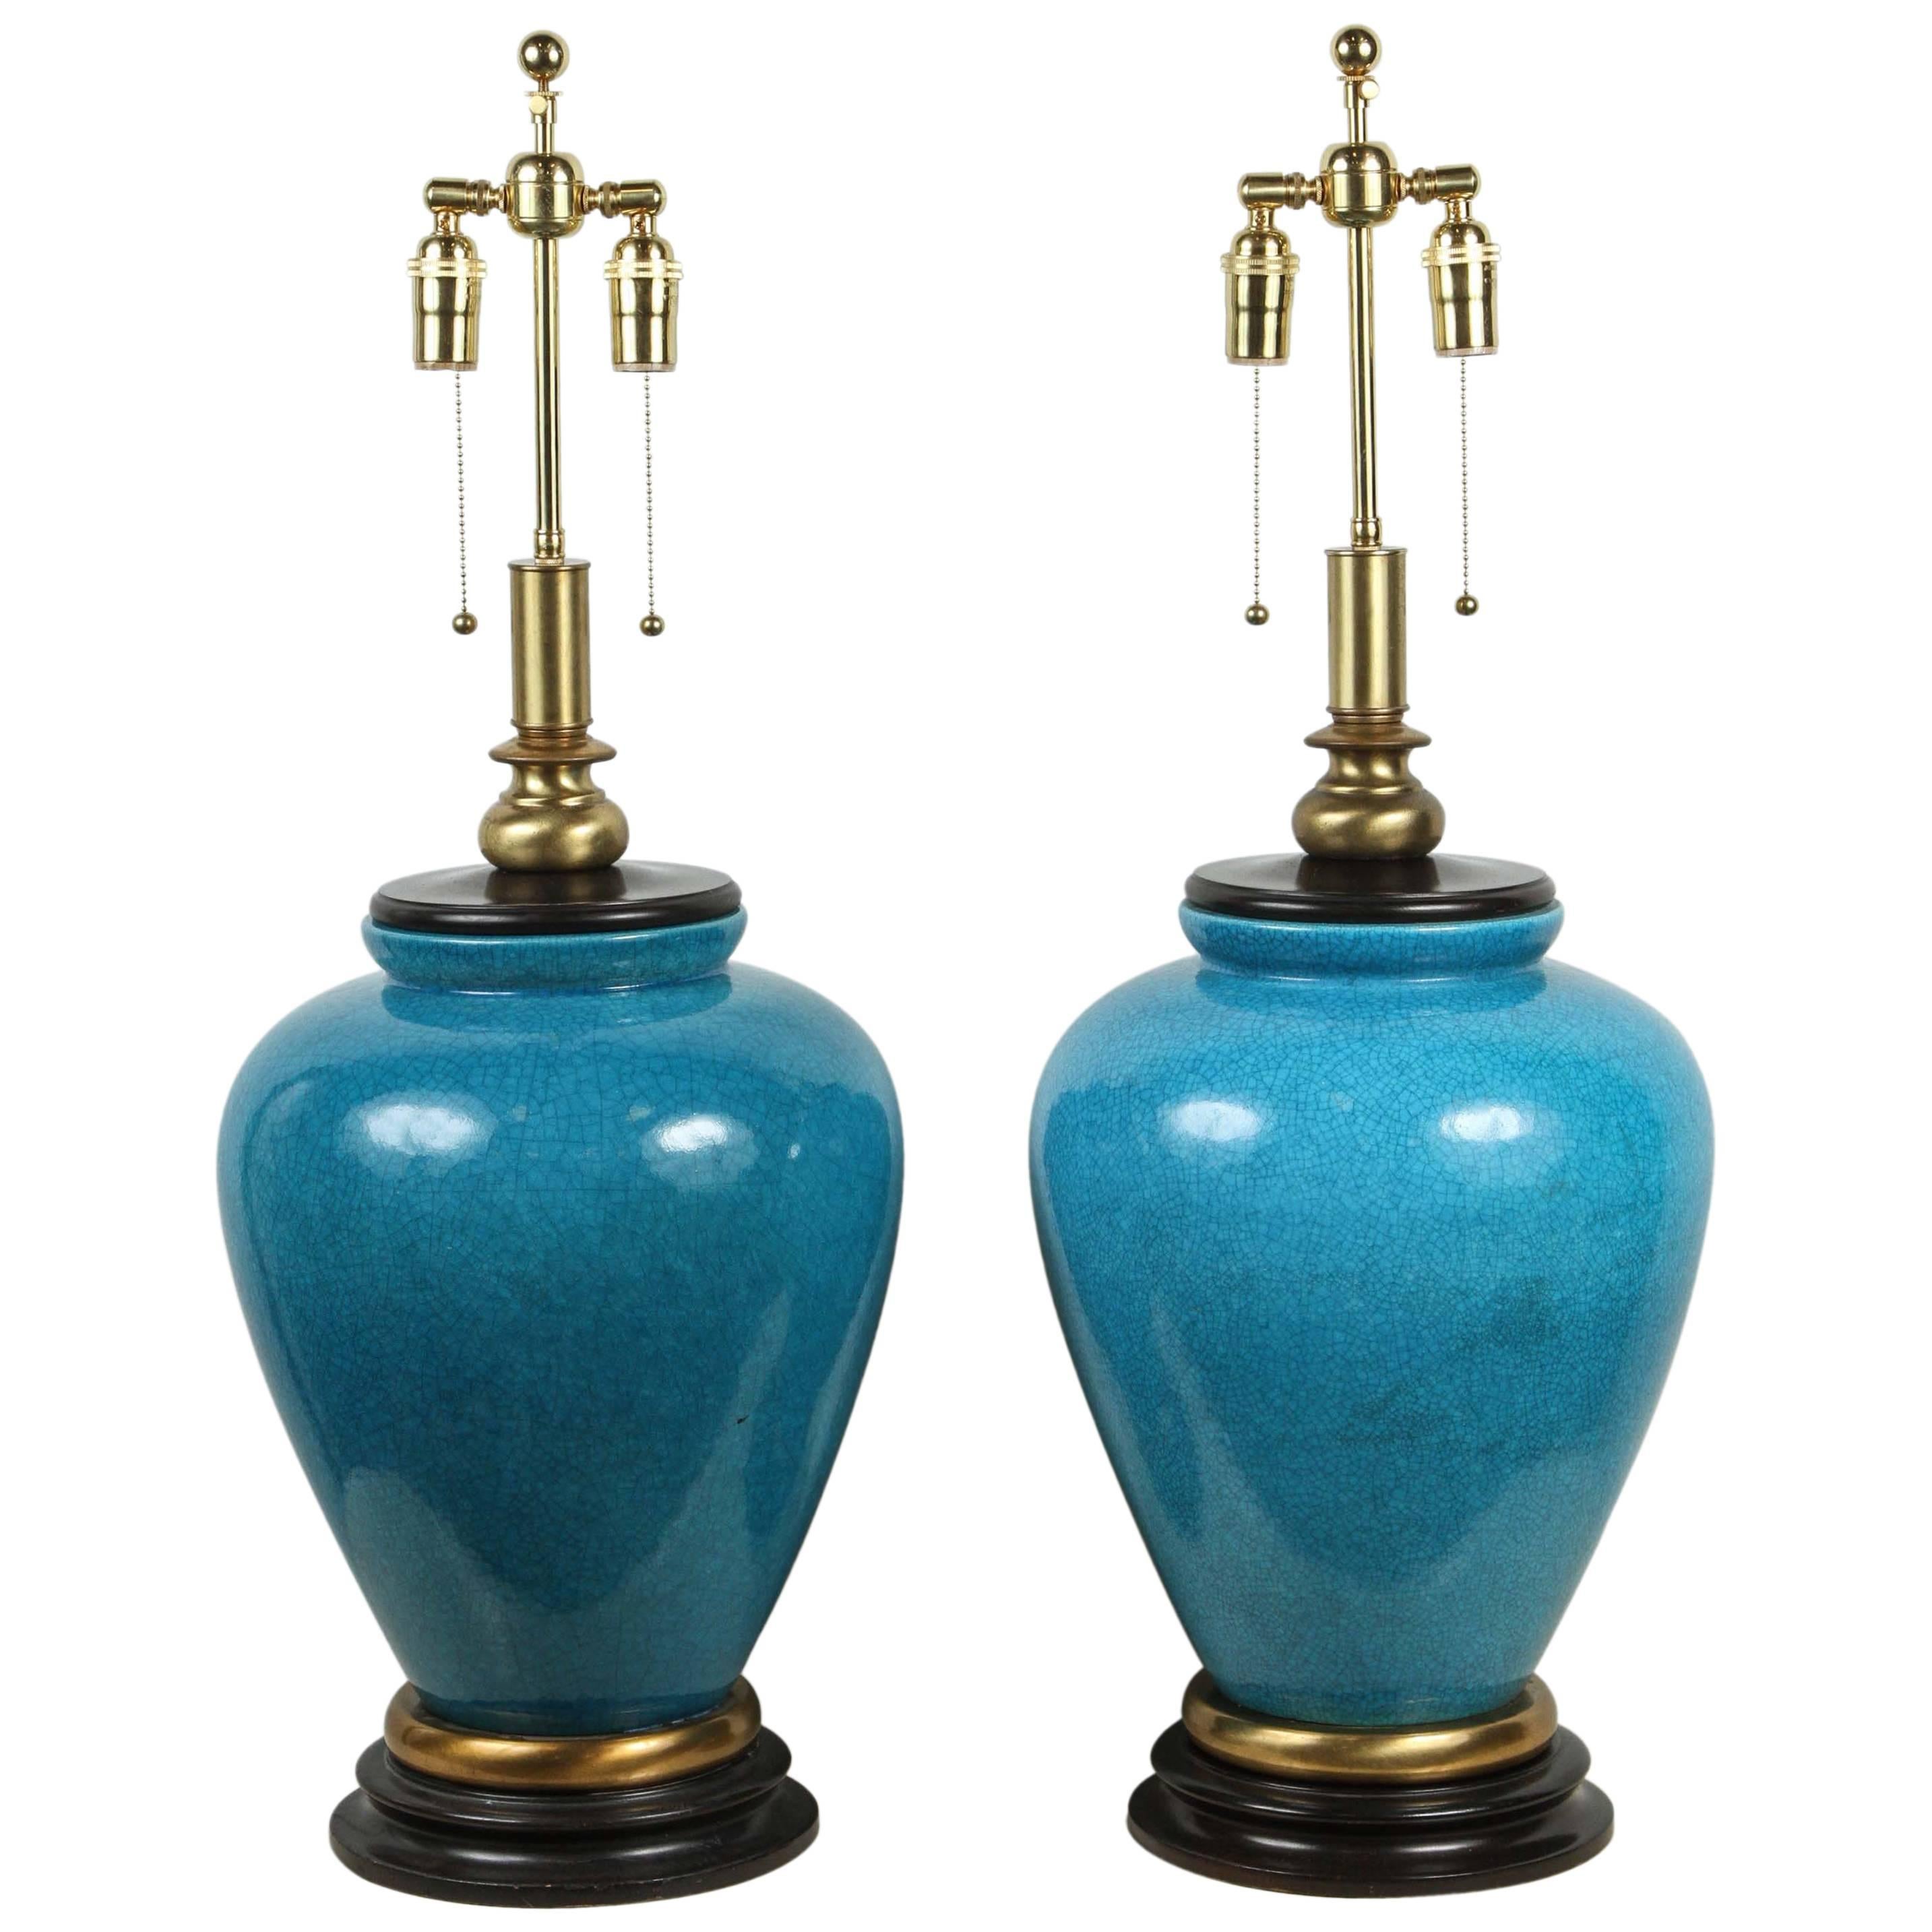 Pair of Large Ceramic Table Lamps with a Gorgeous Cerulean Glaze